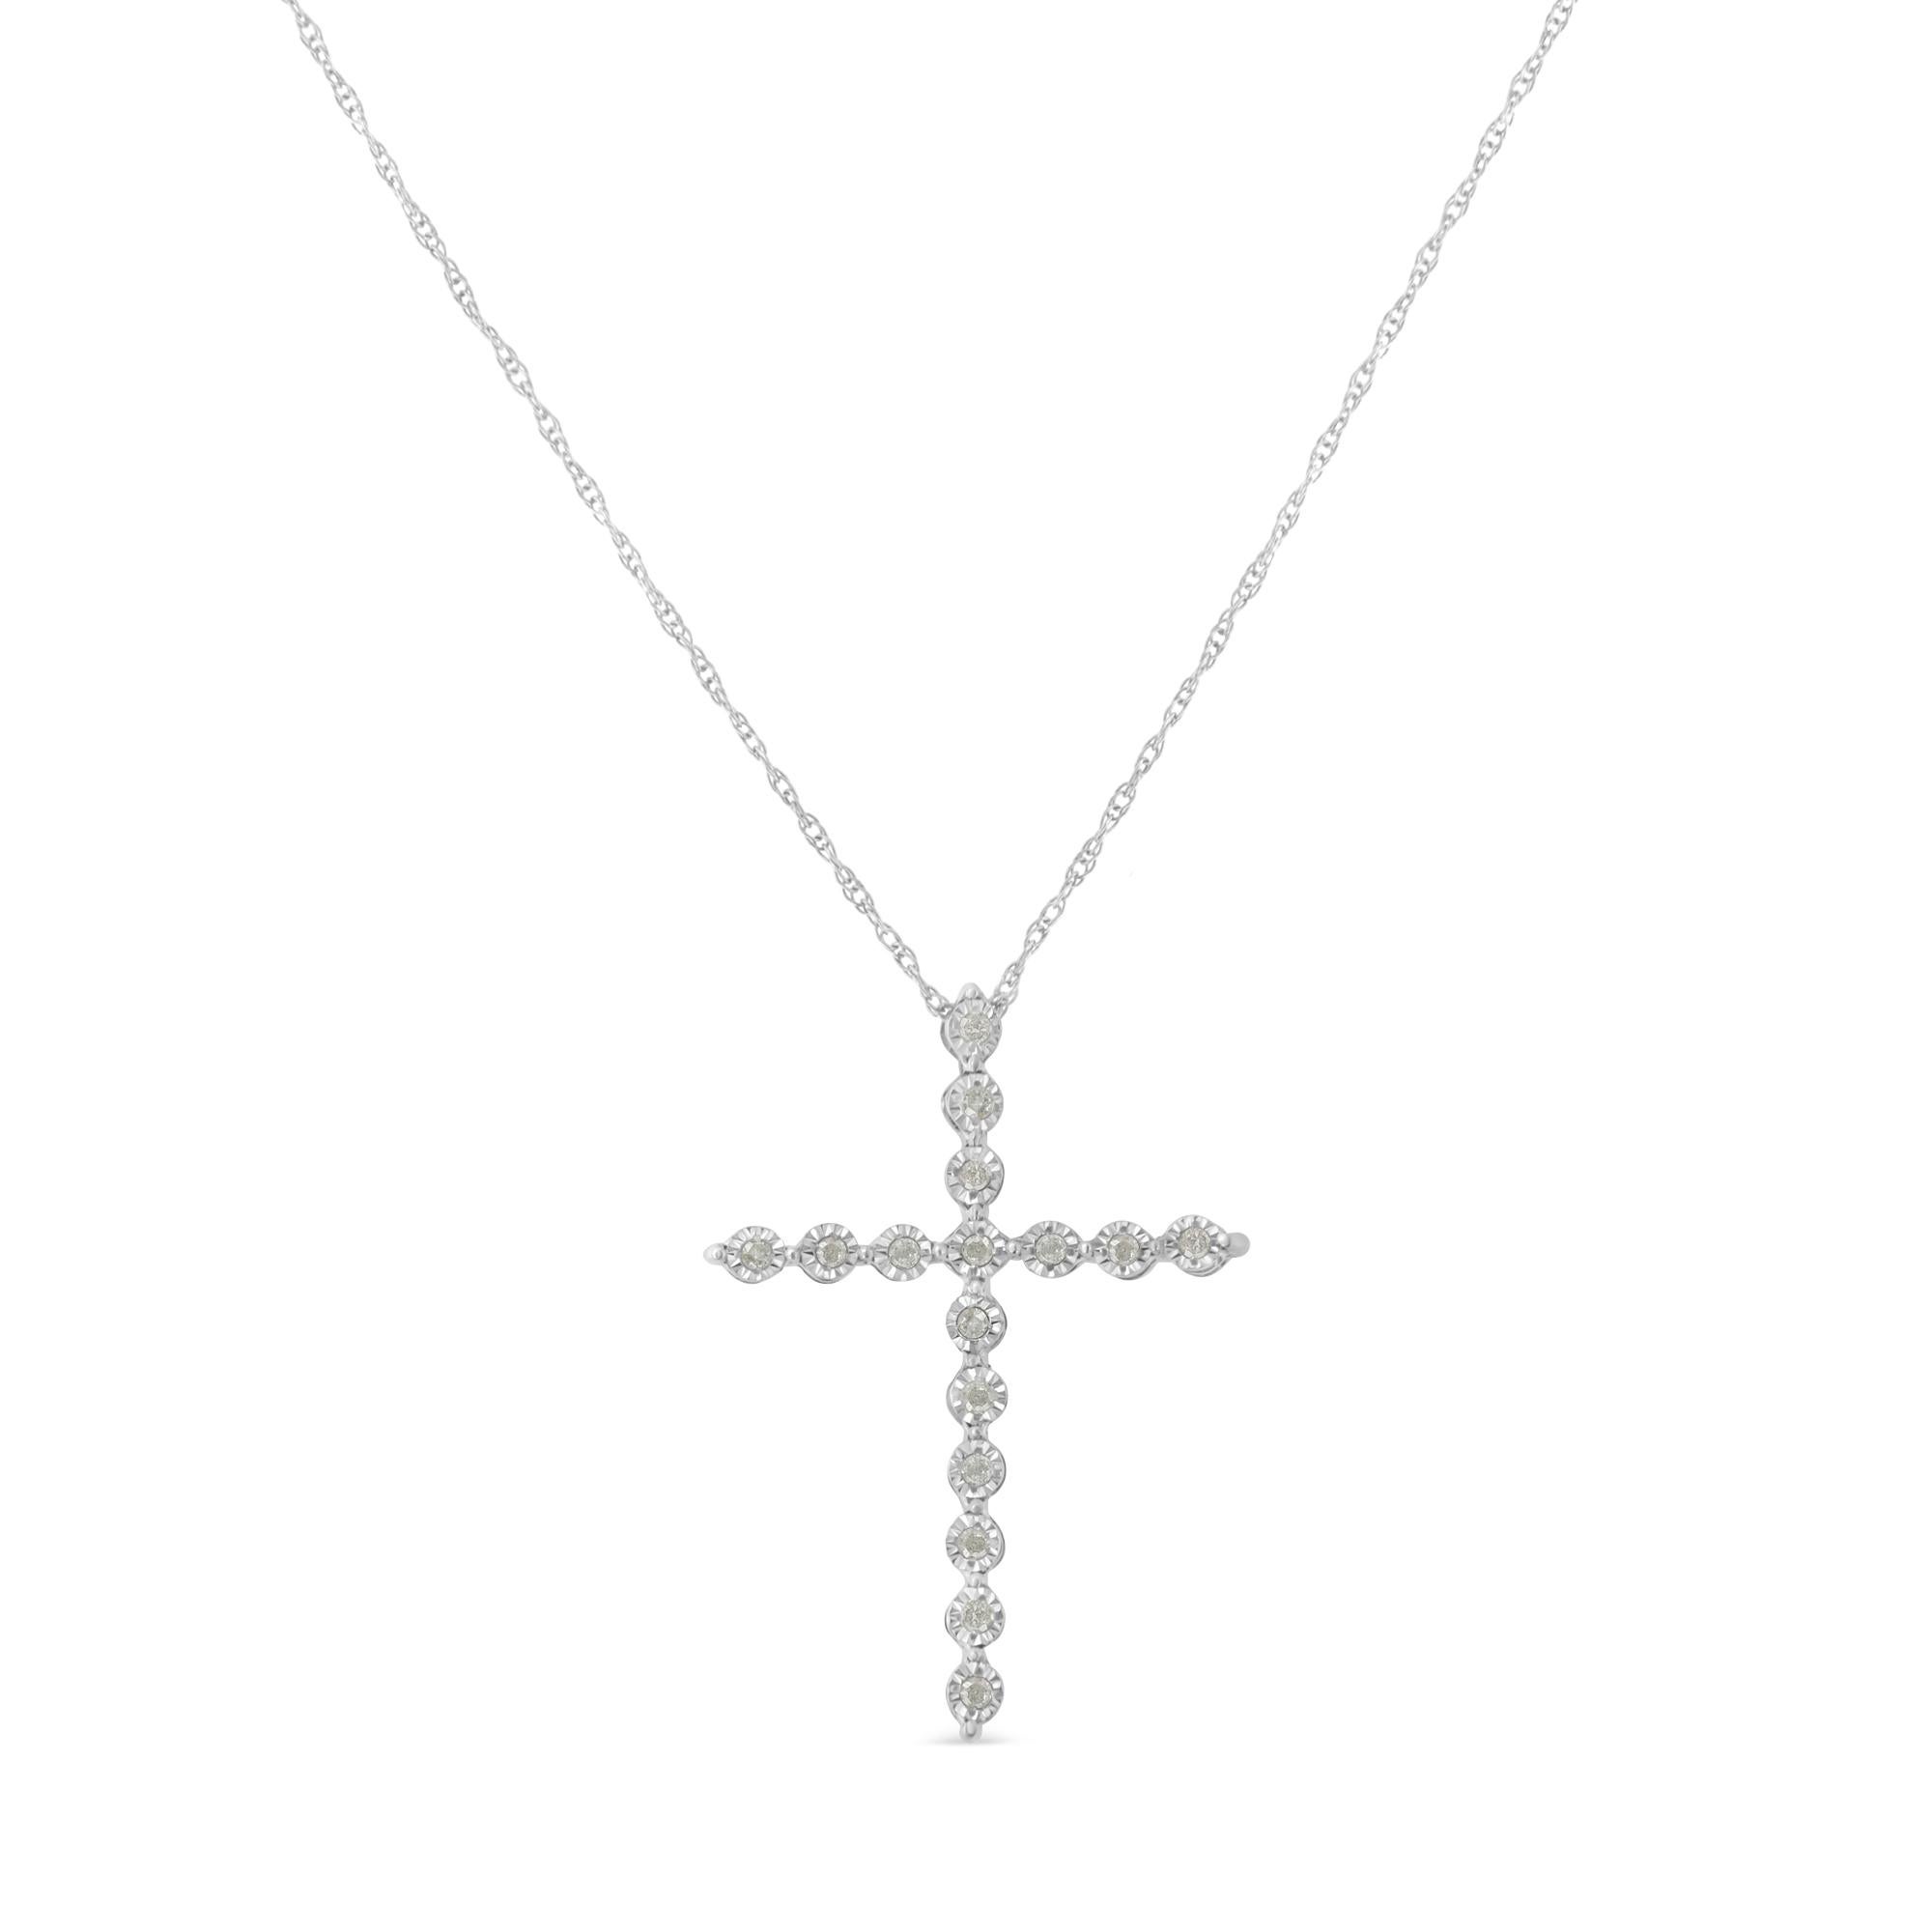 This beautiful piece of jewelry is not only a symbol of devotion and faith but also a true work of art. This gorgeous .925 sterling silver pendant necklace features sixteen round, rose cut, promo quality diamonds in a cross design. Each diamond is